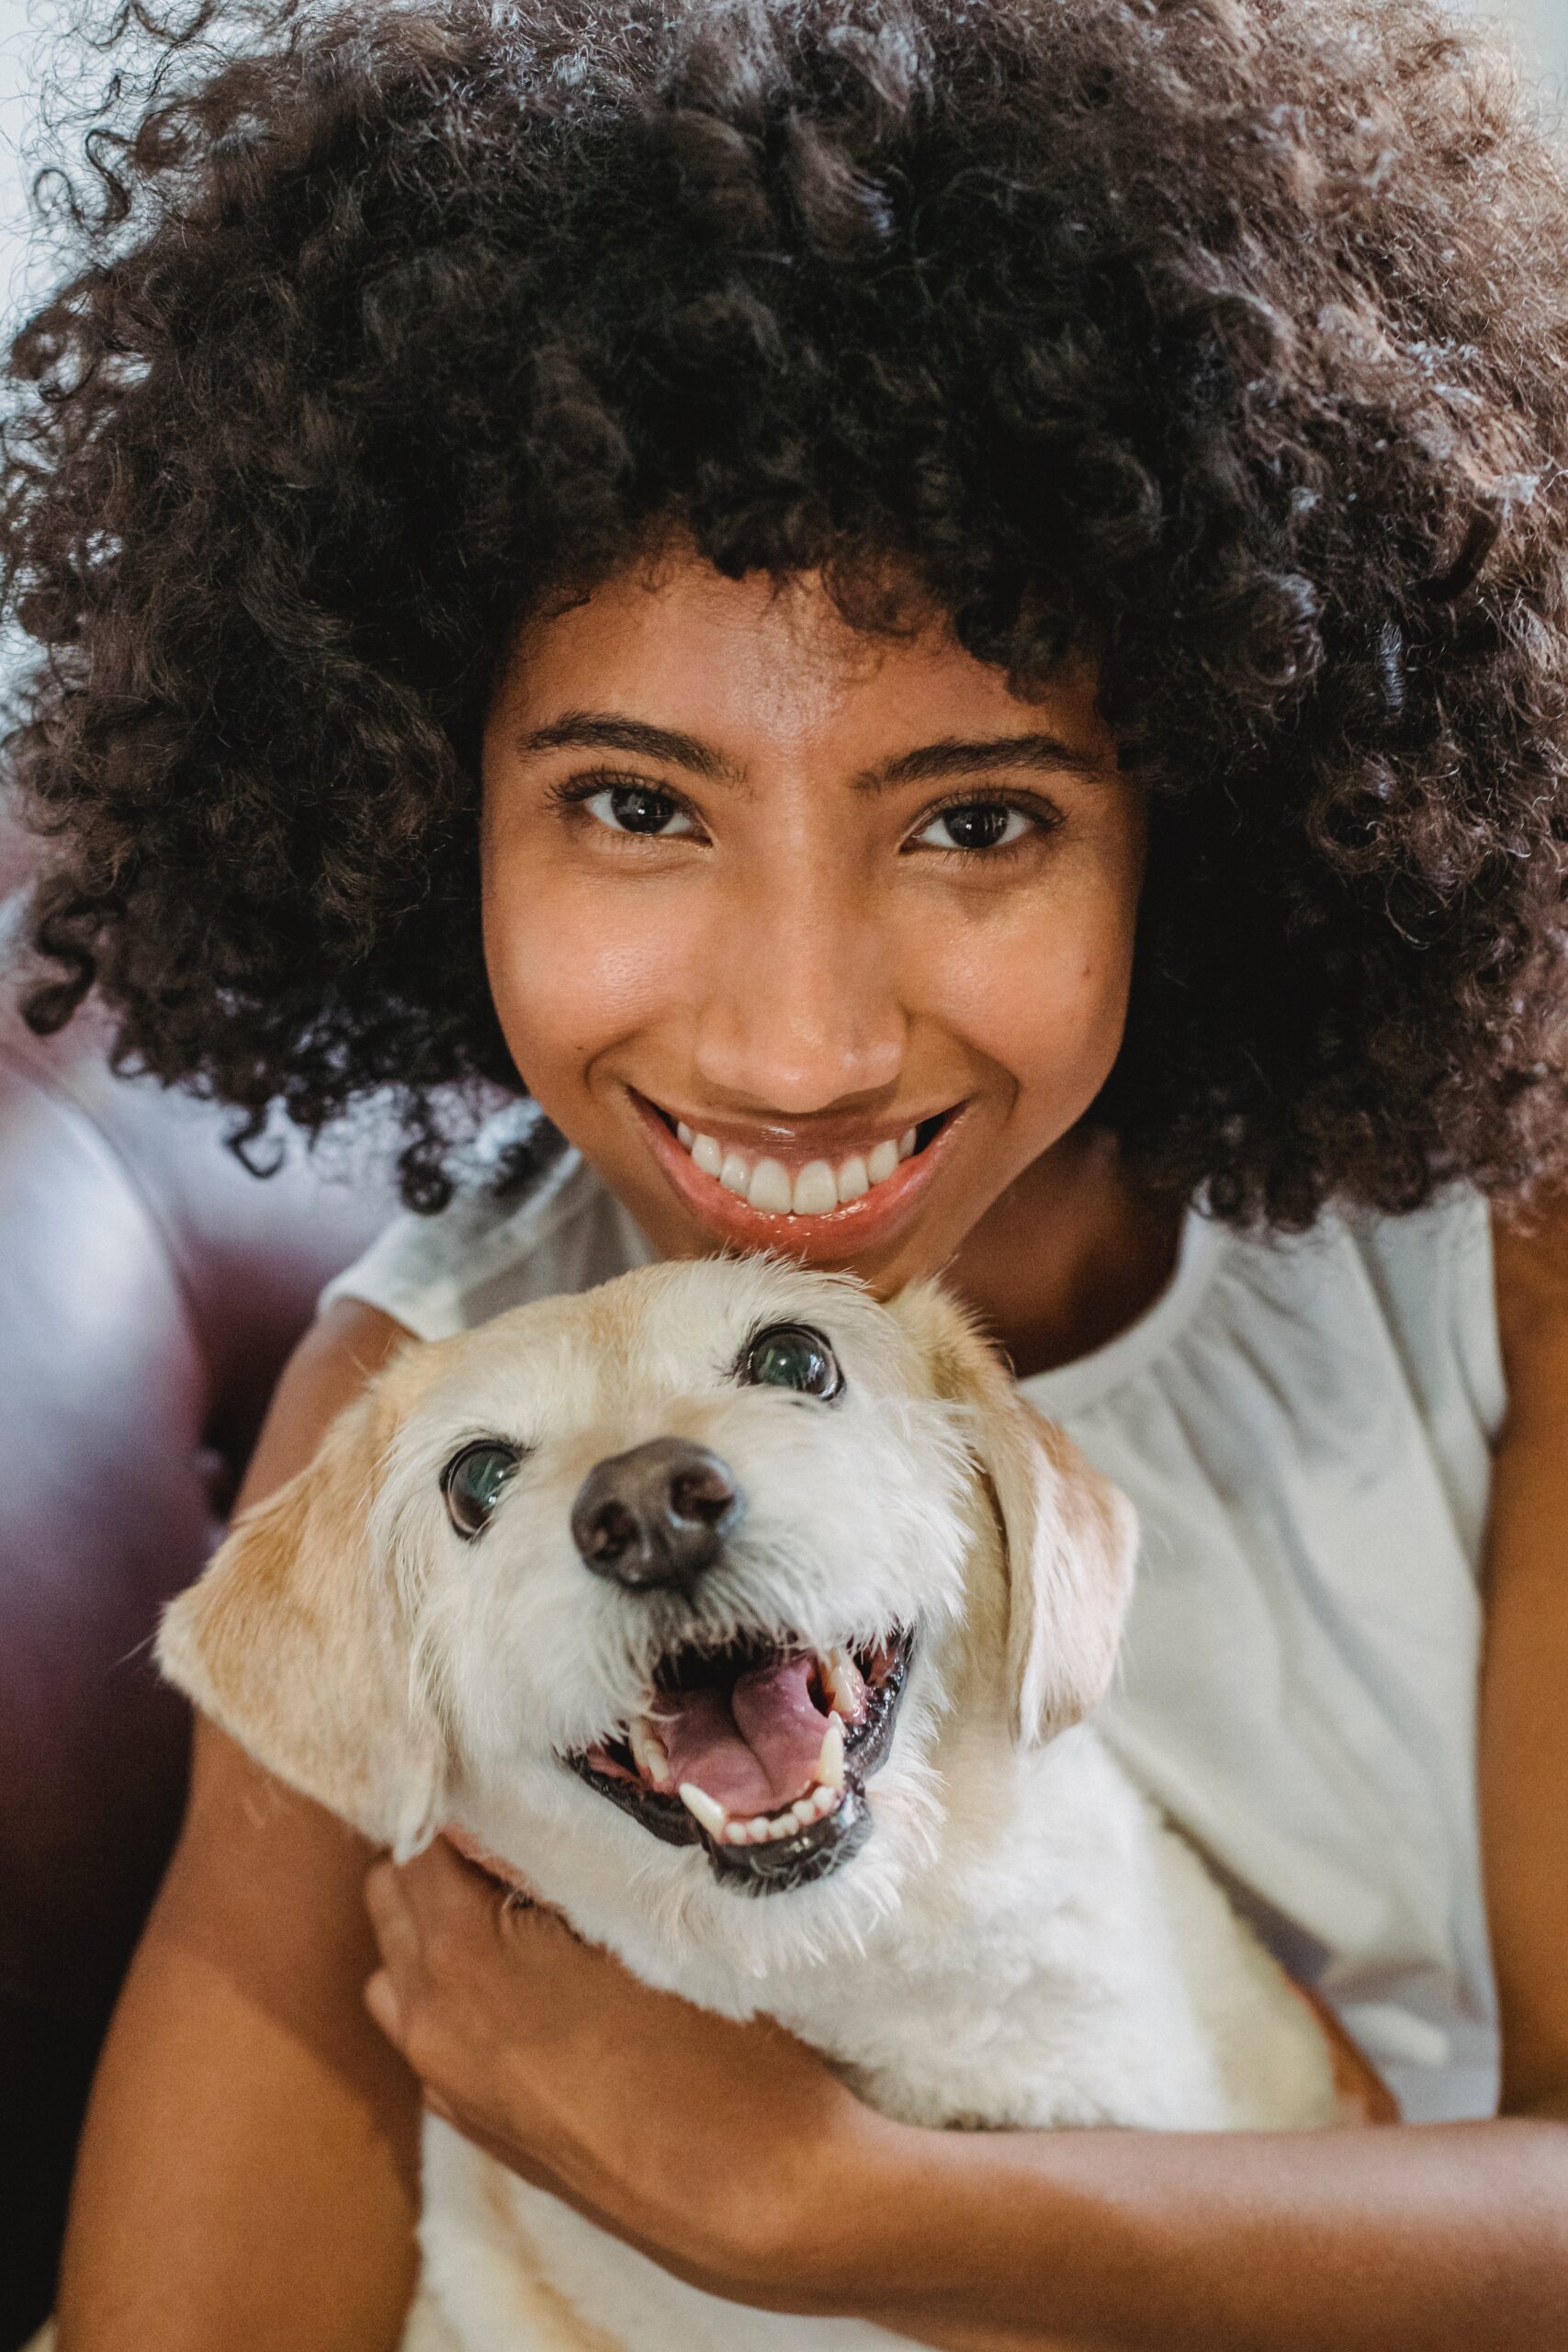 Person with curly hair holding a smiling dog with cream colored hair.